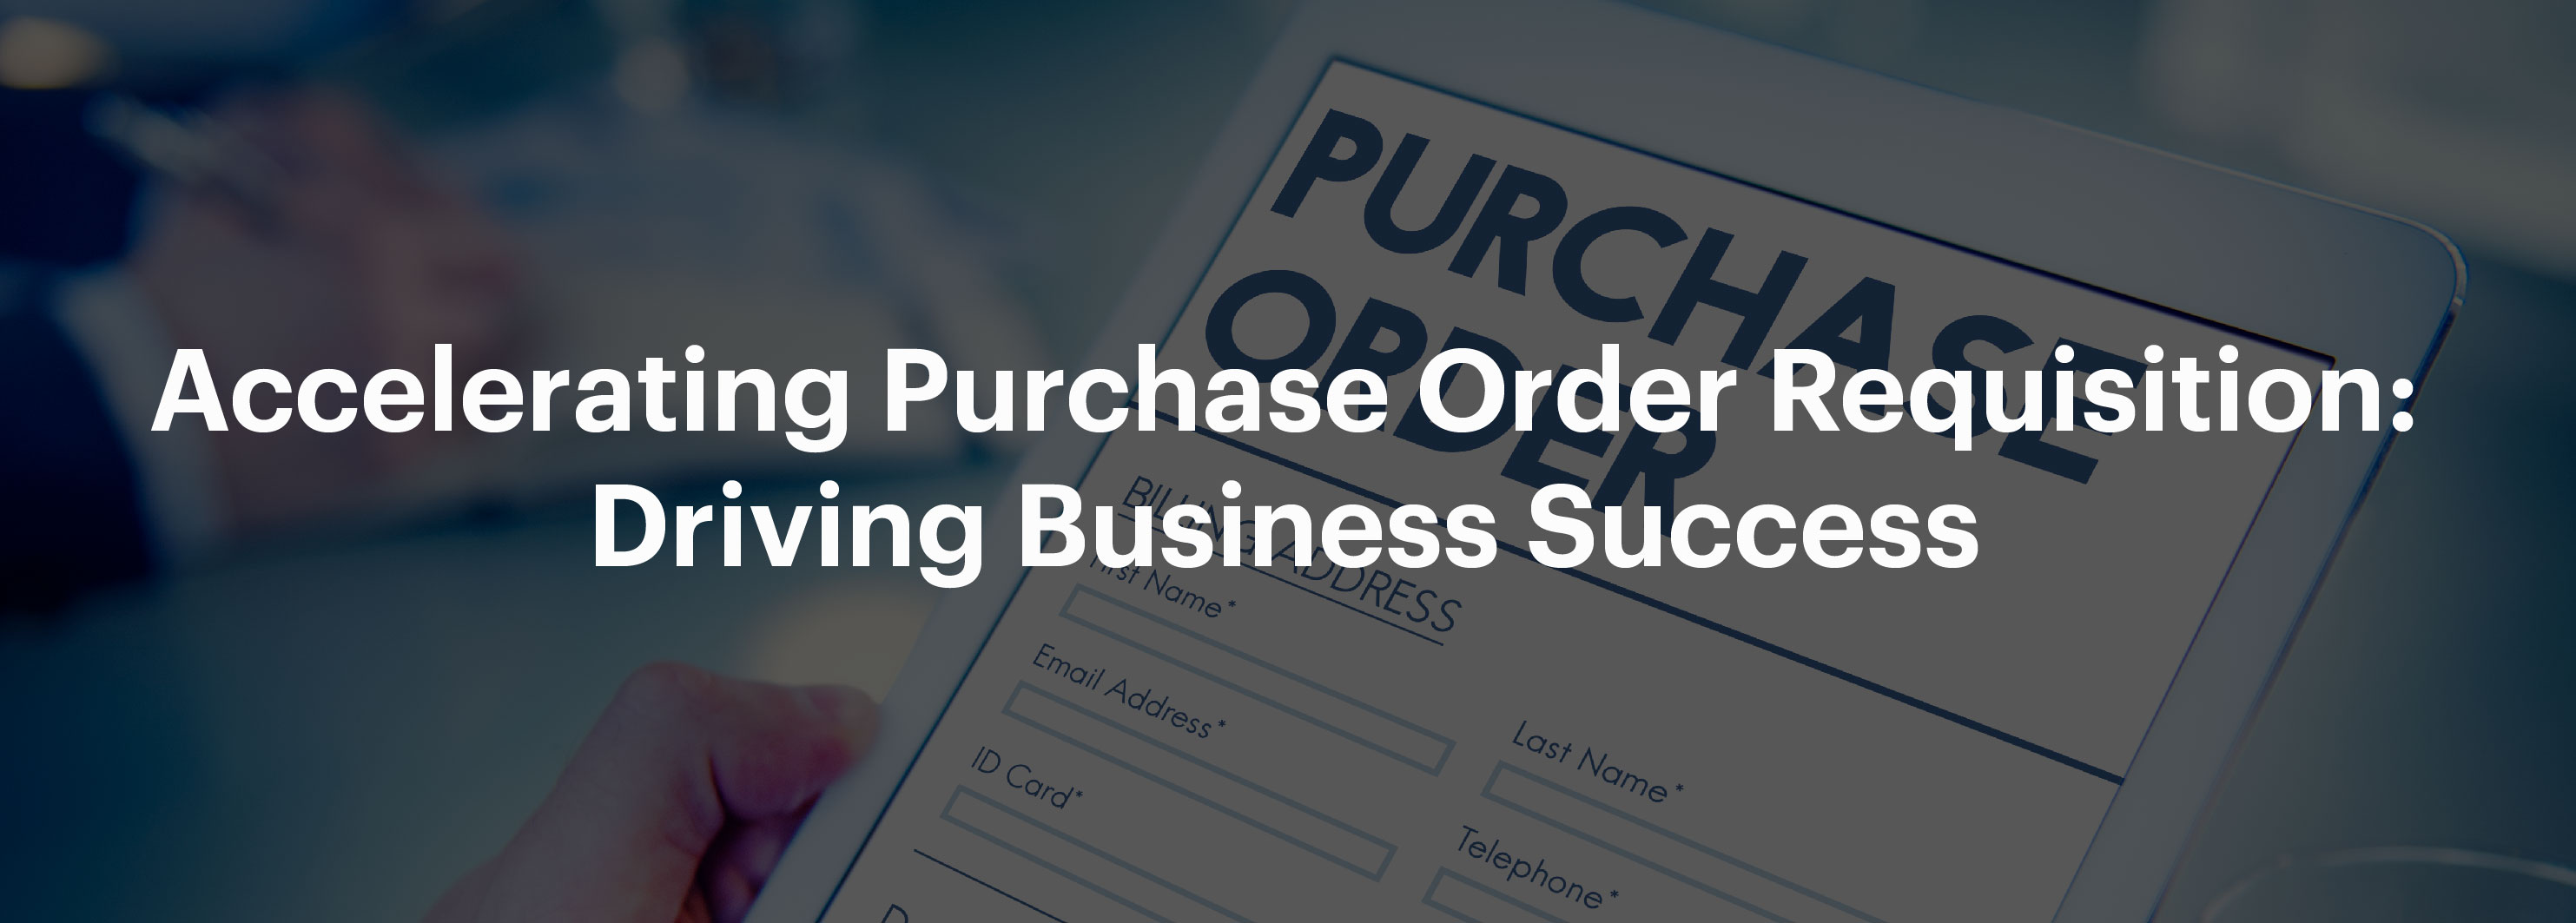 Accelerating Purchase Order Requisition: Driving Business Success